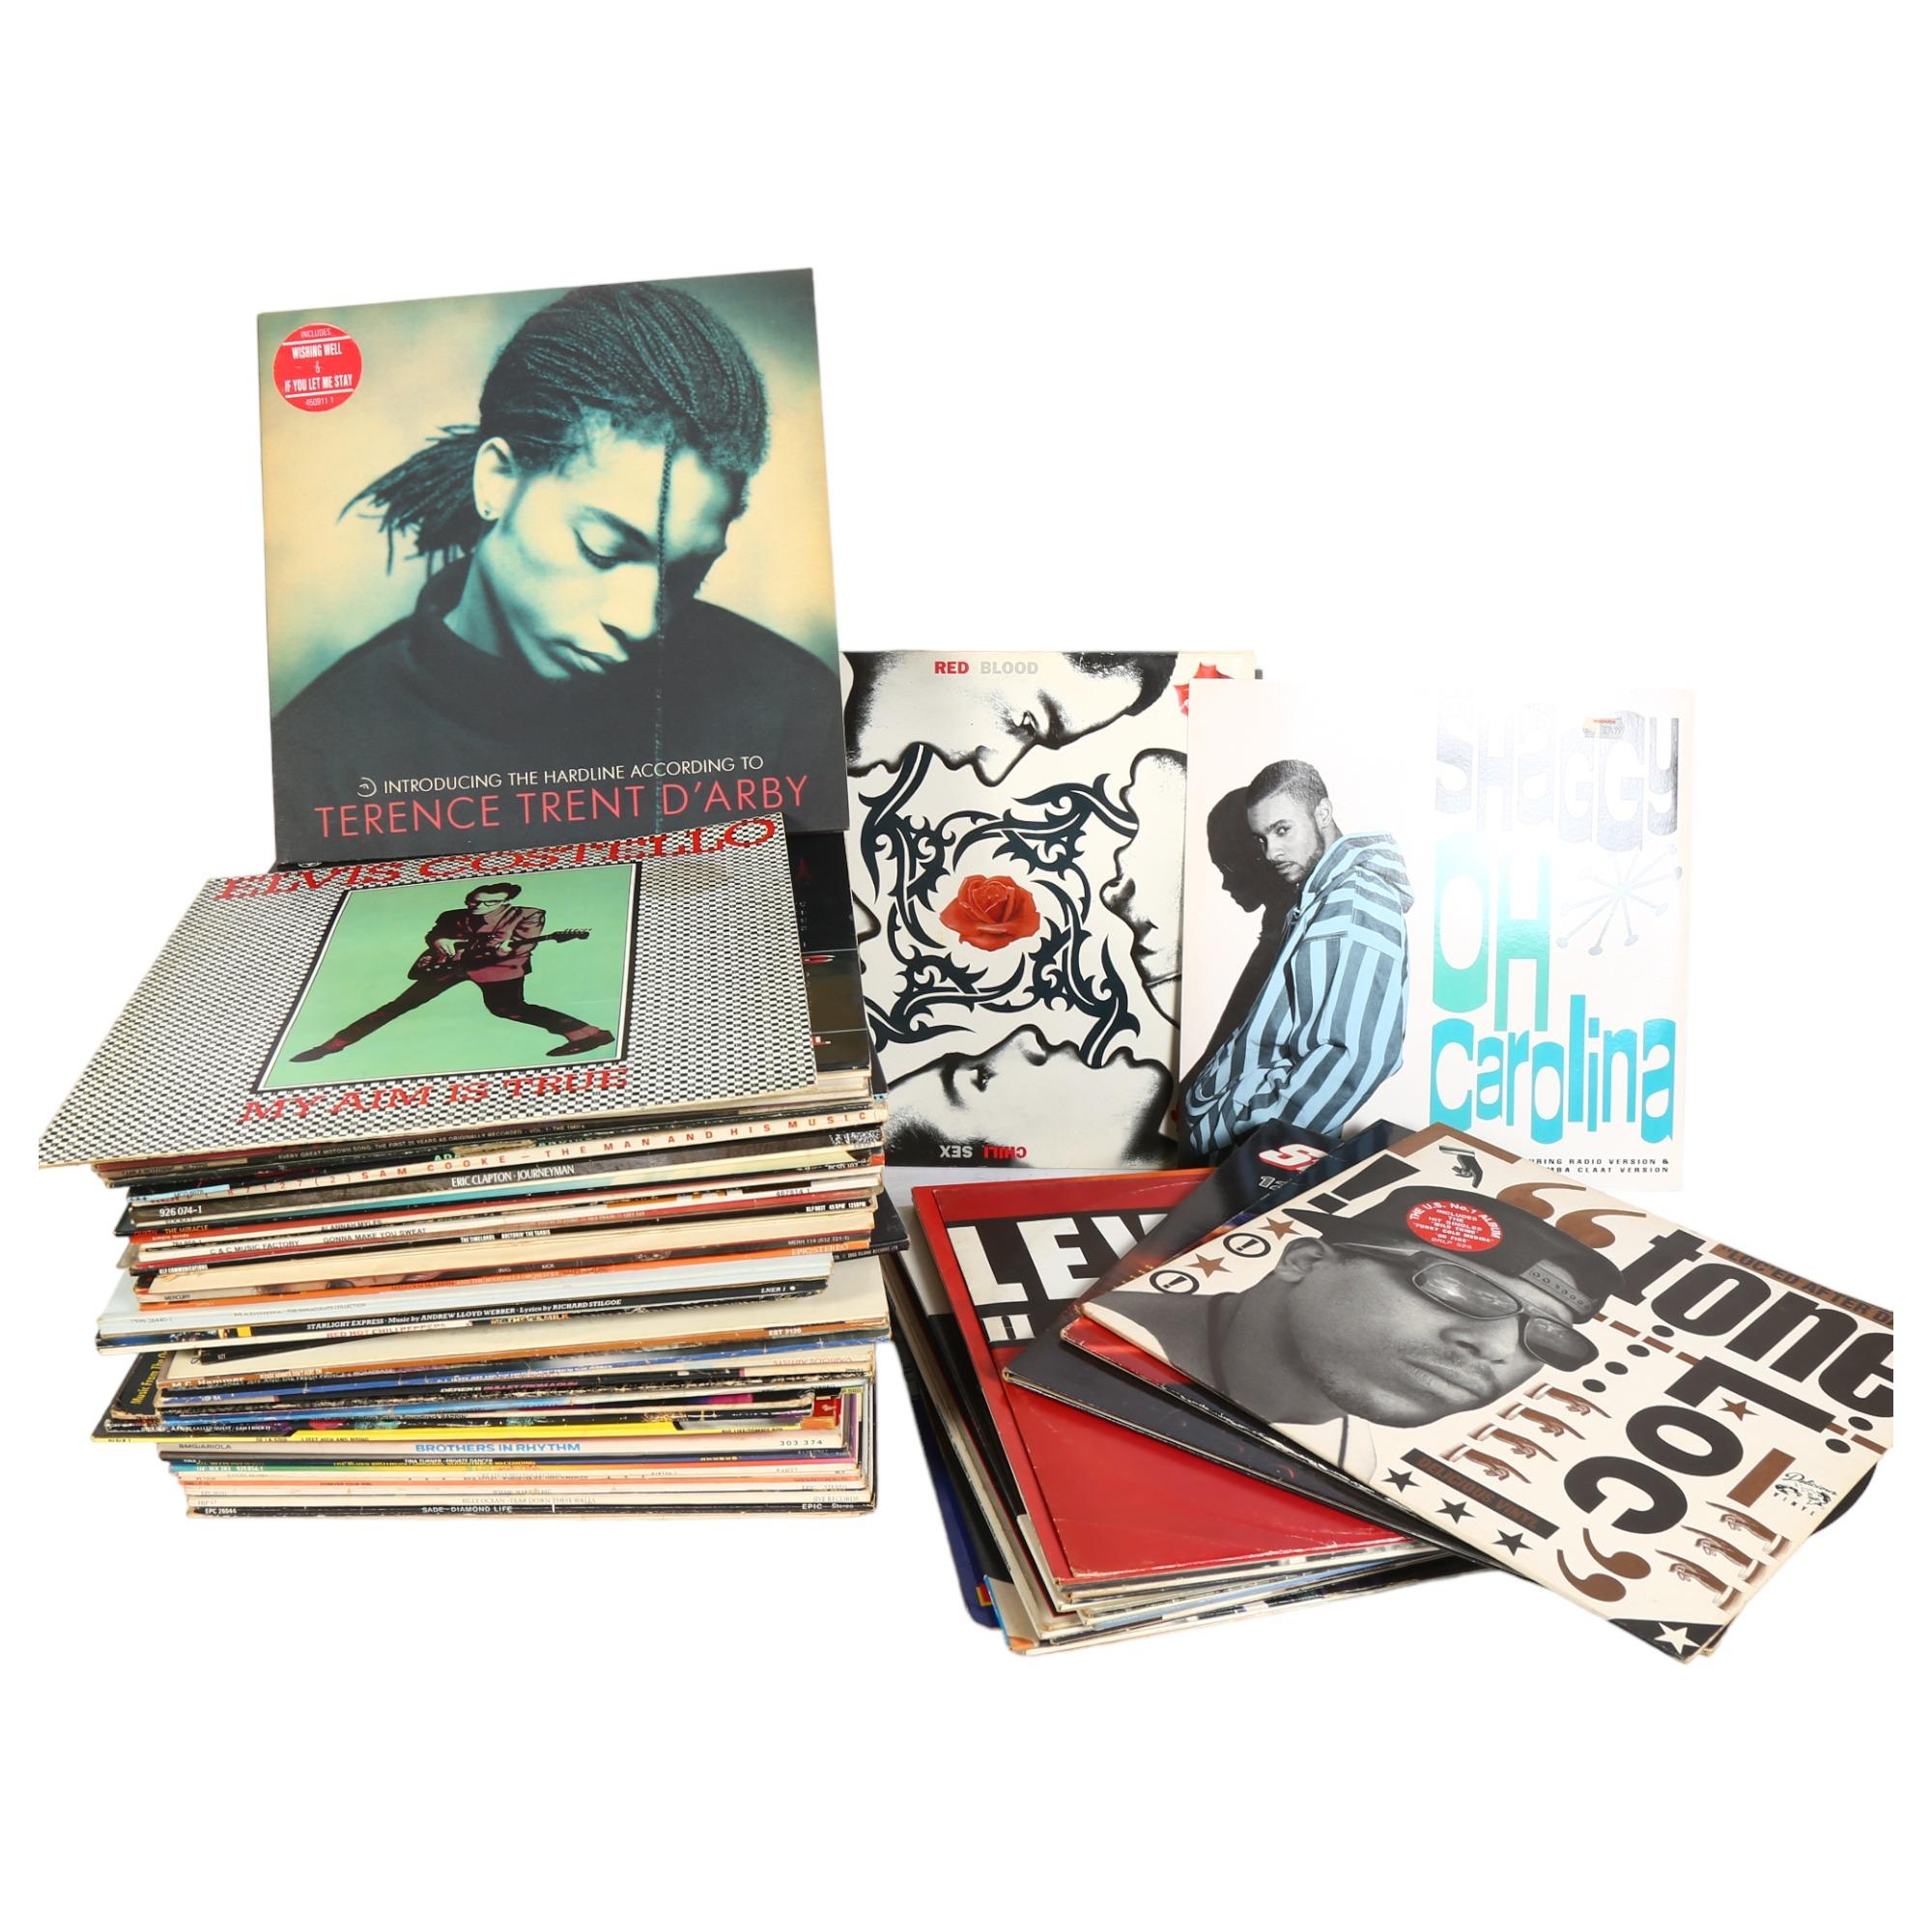 A quantity of vinyl LPs and 12" singles, including such artists as Queen, Fairground Attraction,